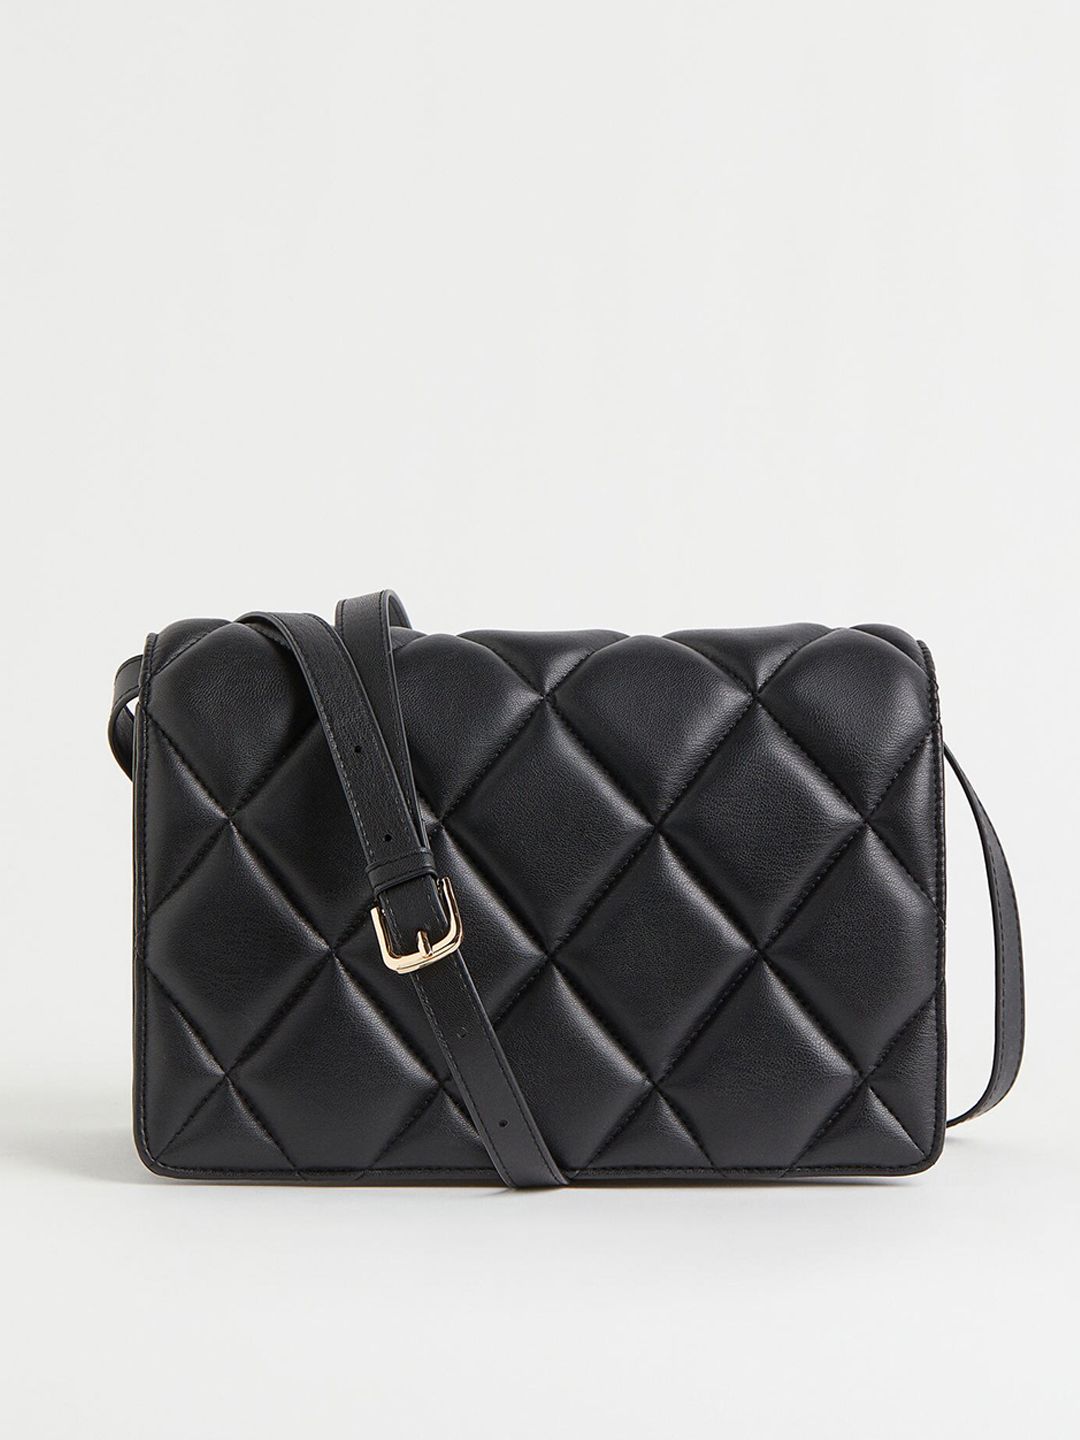 H&M Black Solid Quilted Shoulder Bag Price in India